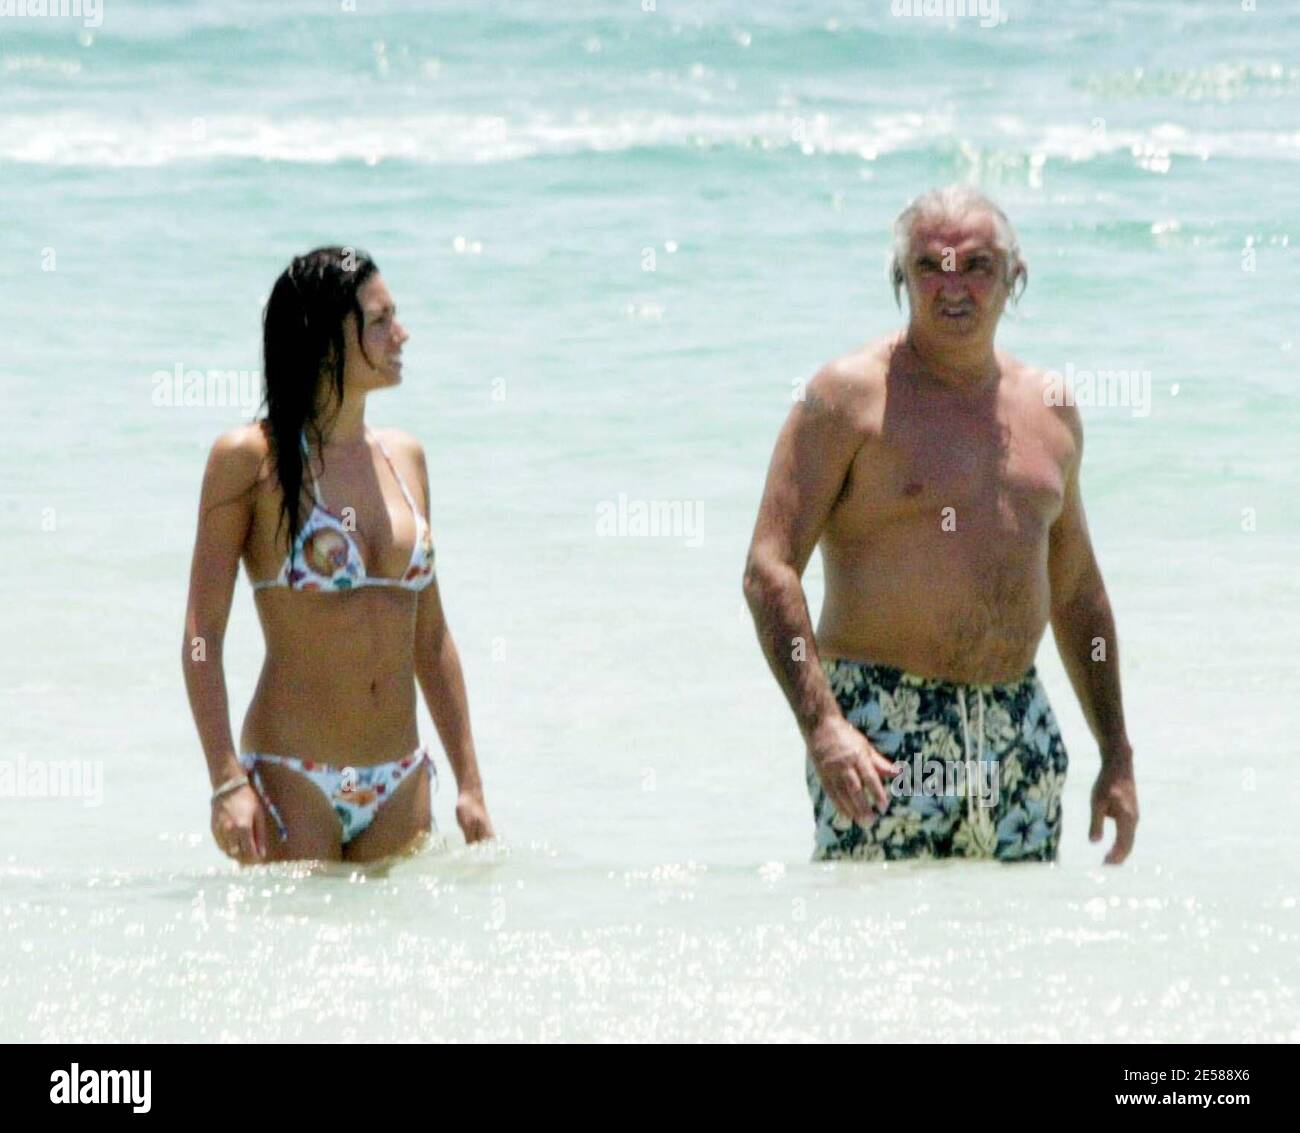 Exclusive!! Formula One Renault Boss Flavio Briatore and model girlfriend  Elisabetta Gregoraci get playful on a recent trip to Florida. The pair got  hot and heavy under the sun on Miami Beach